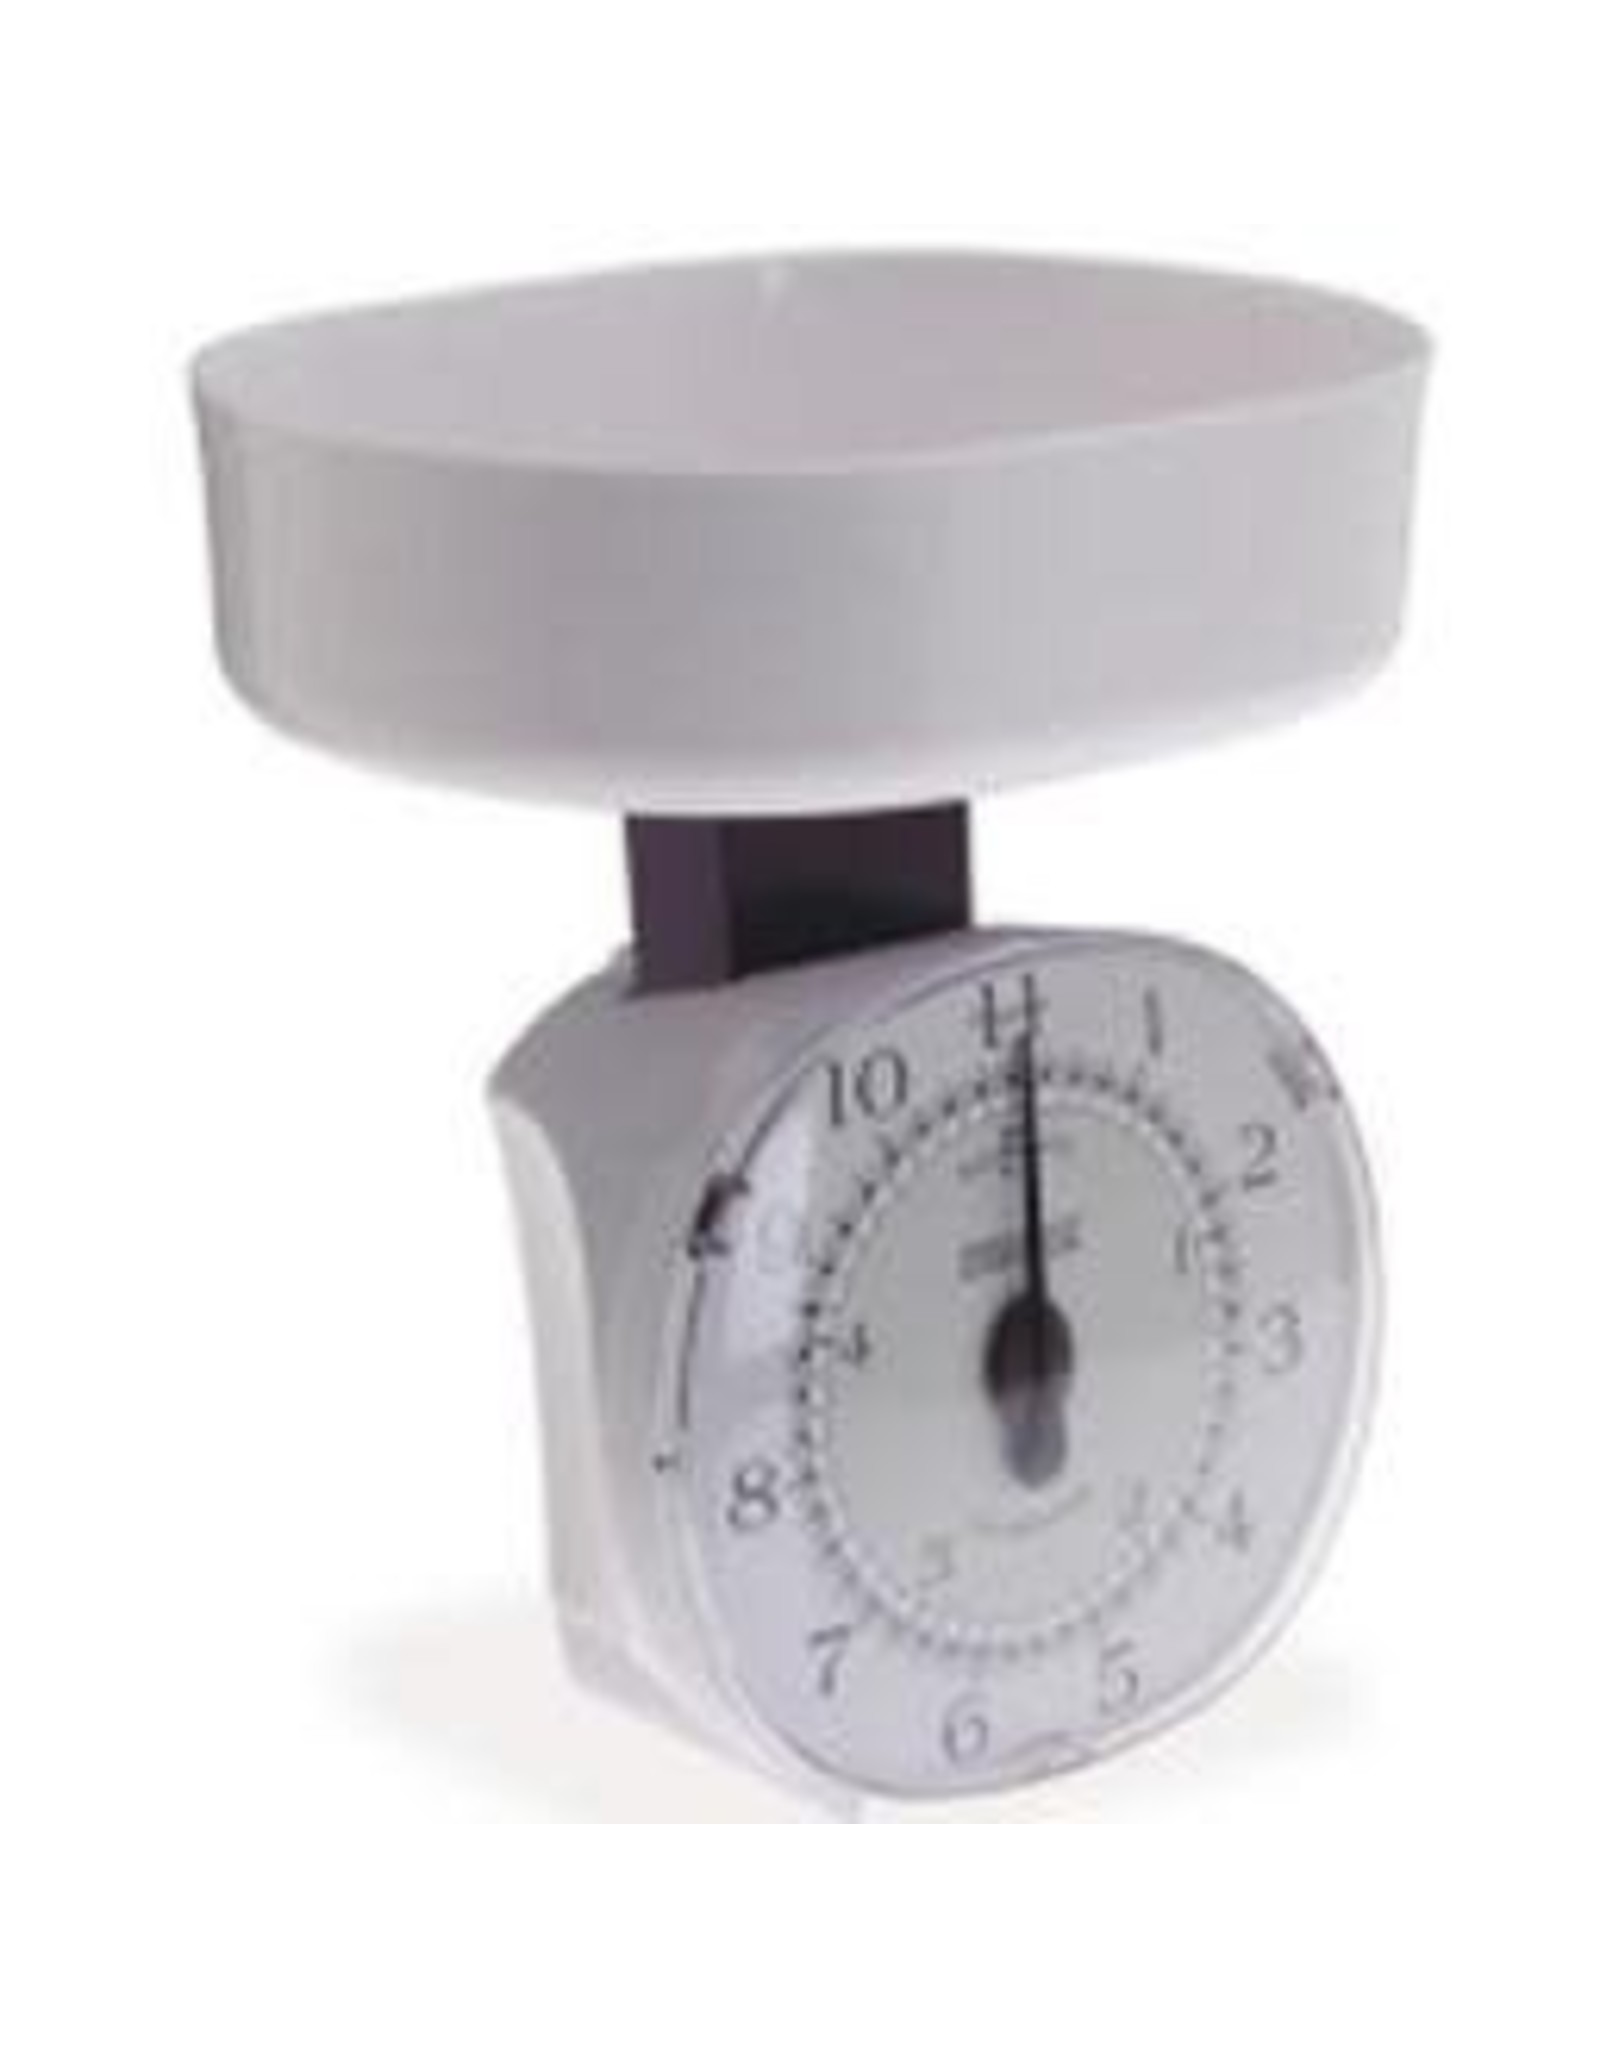 DIAL WEIGHT SCALE 11 LB CAPACITY